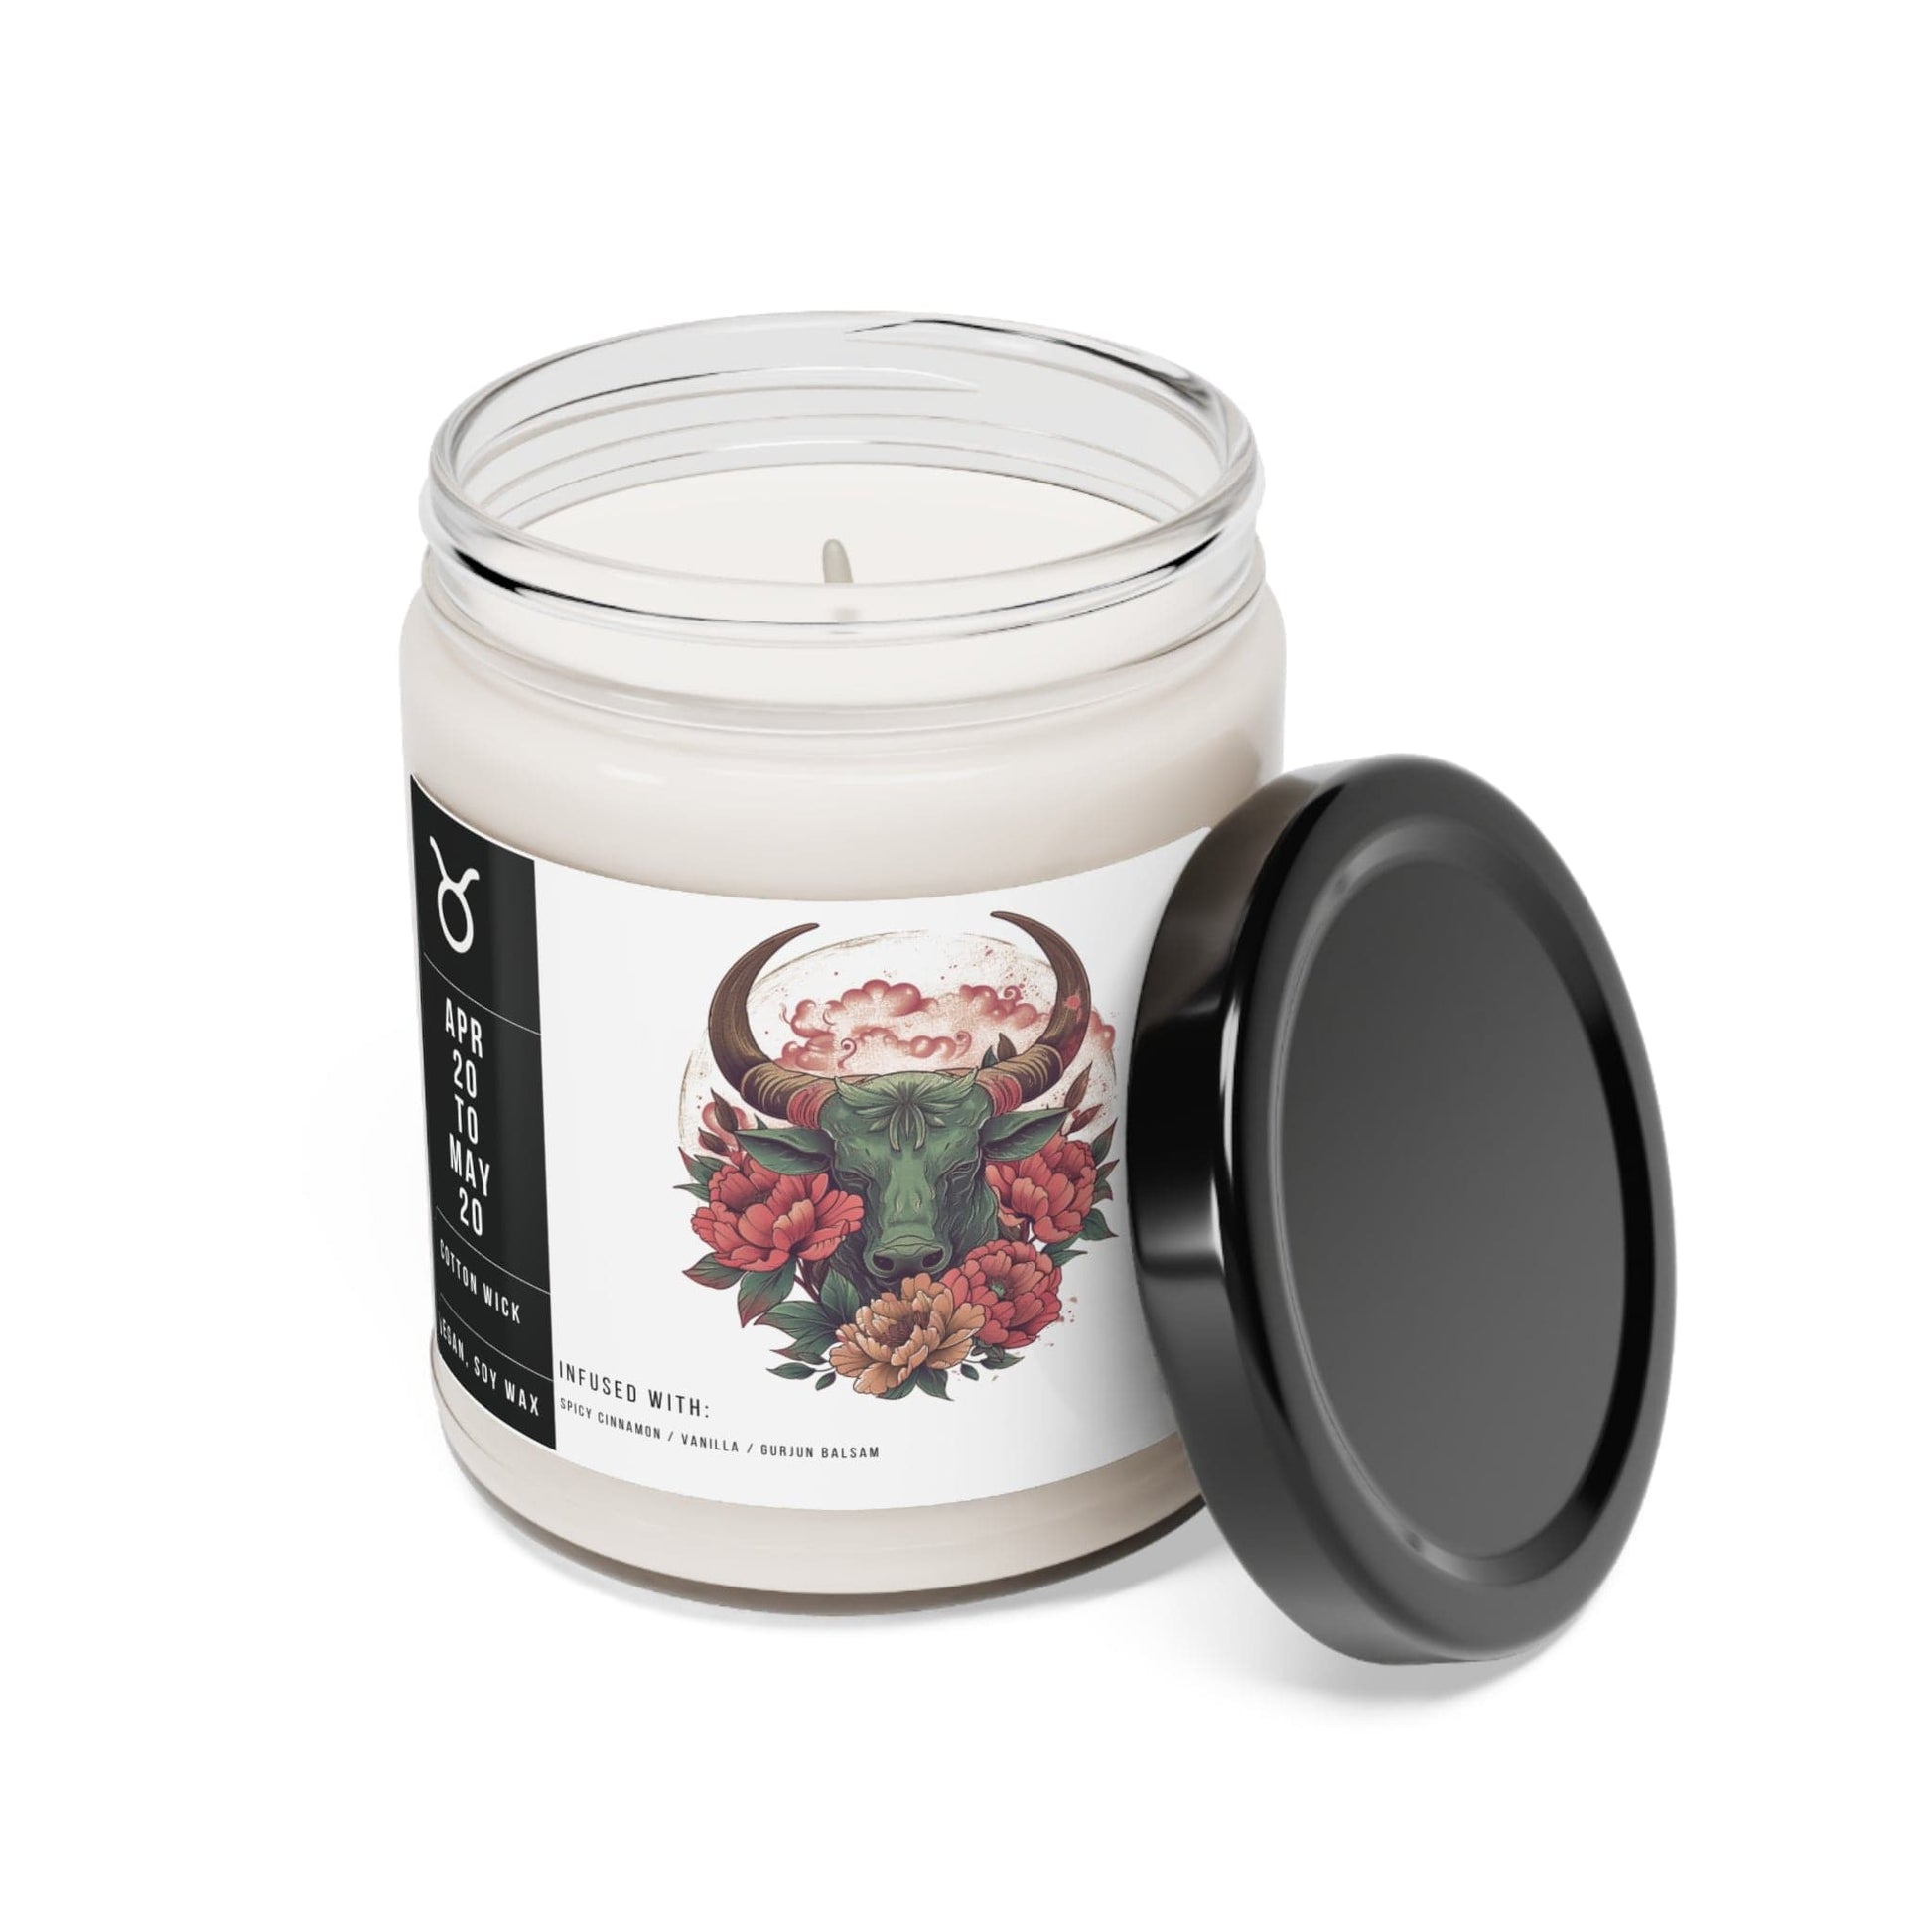 Home Decor Cinnamon Vanilla / 9oz Taurus Zodiac Scented Soy Candle Collection – Essence of the Earth